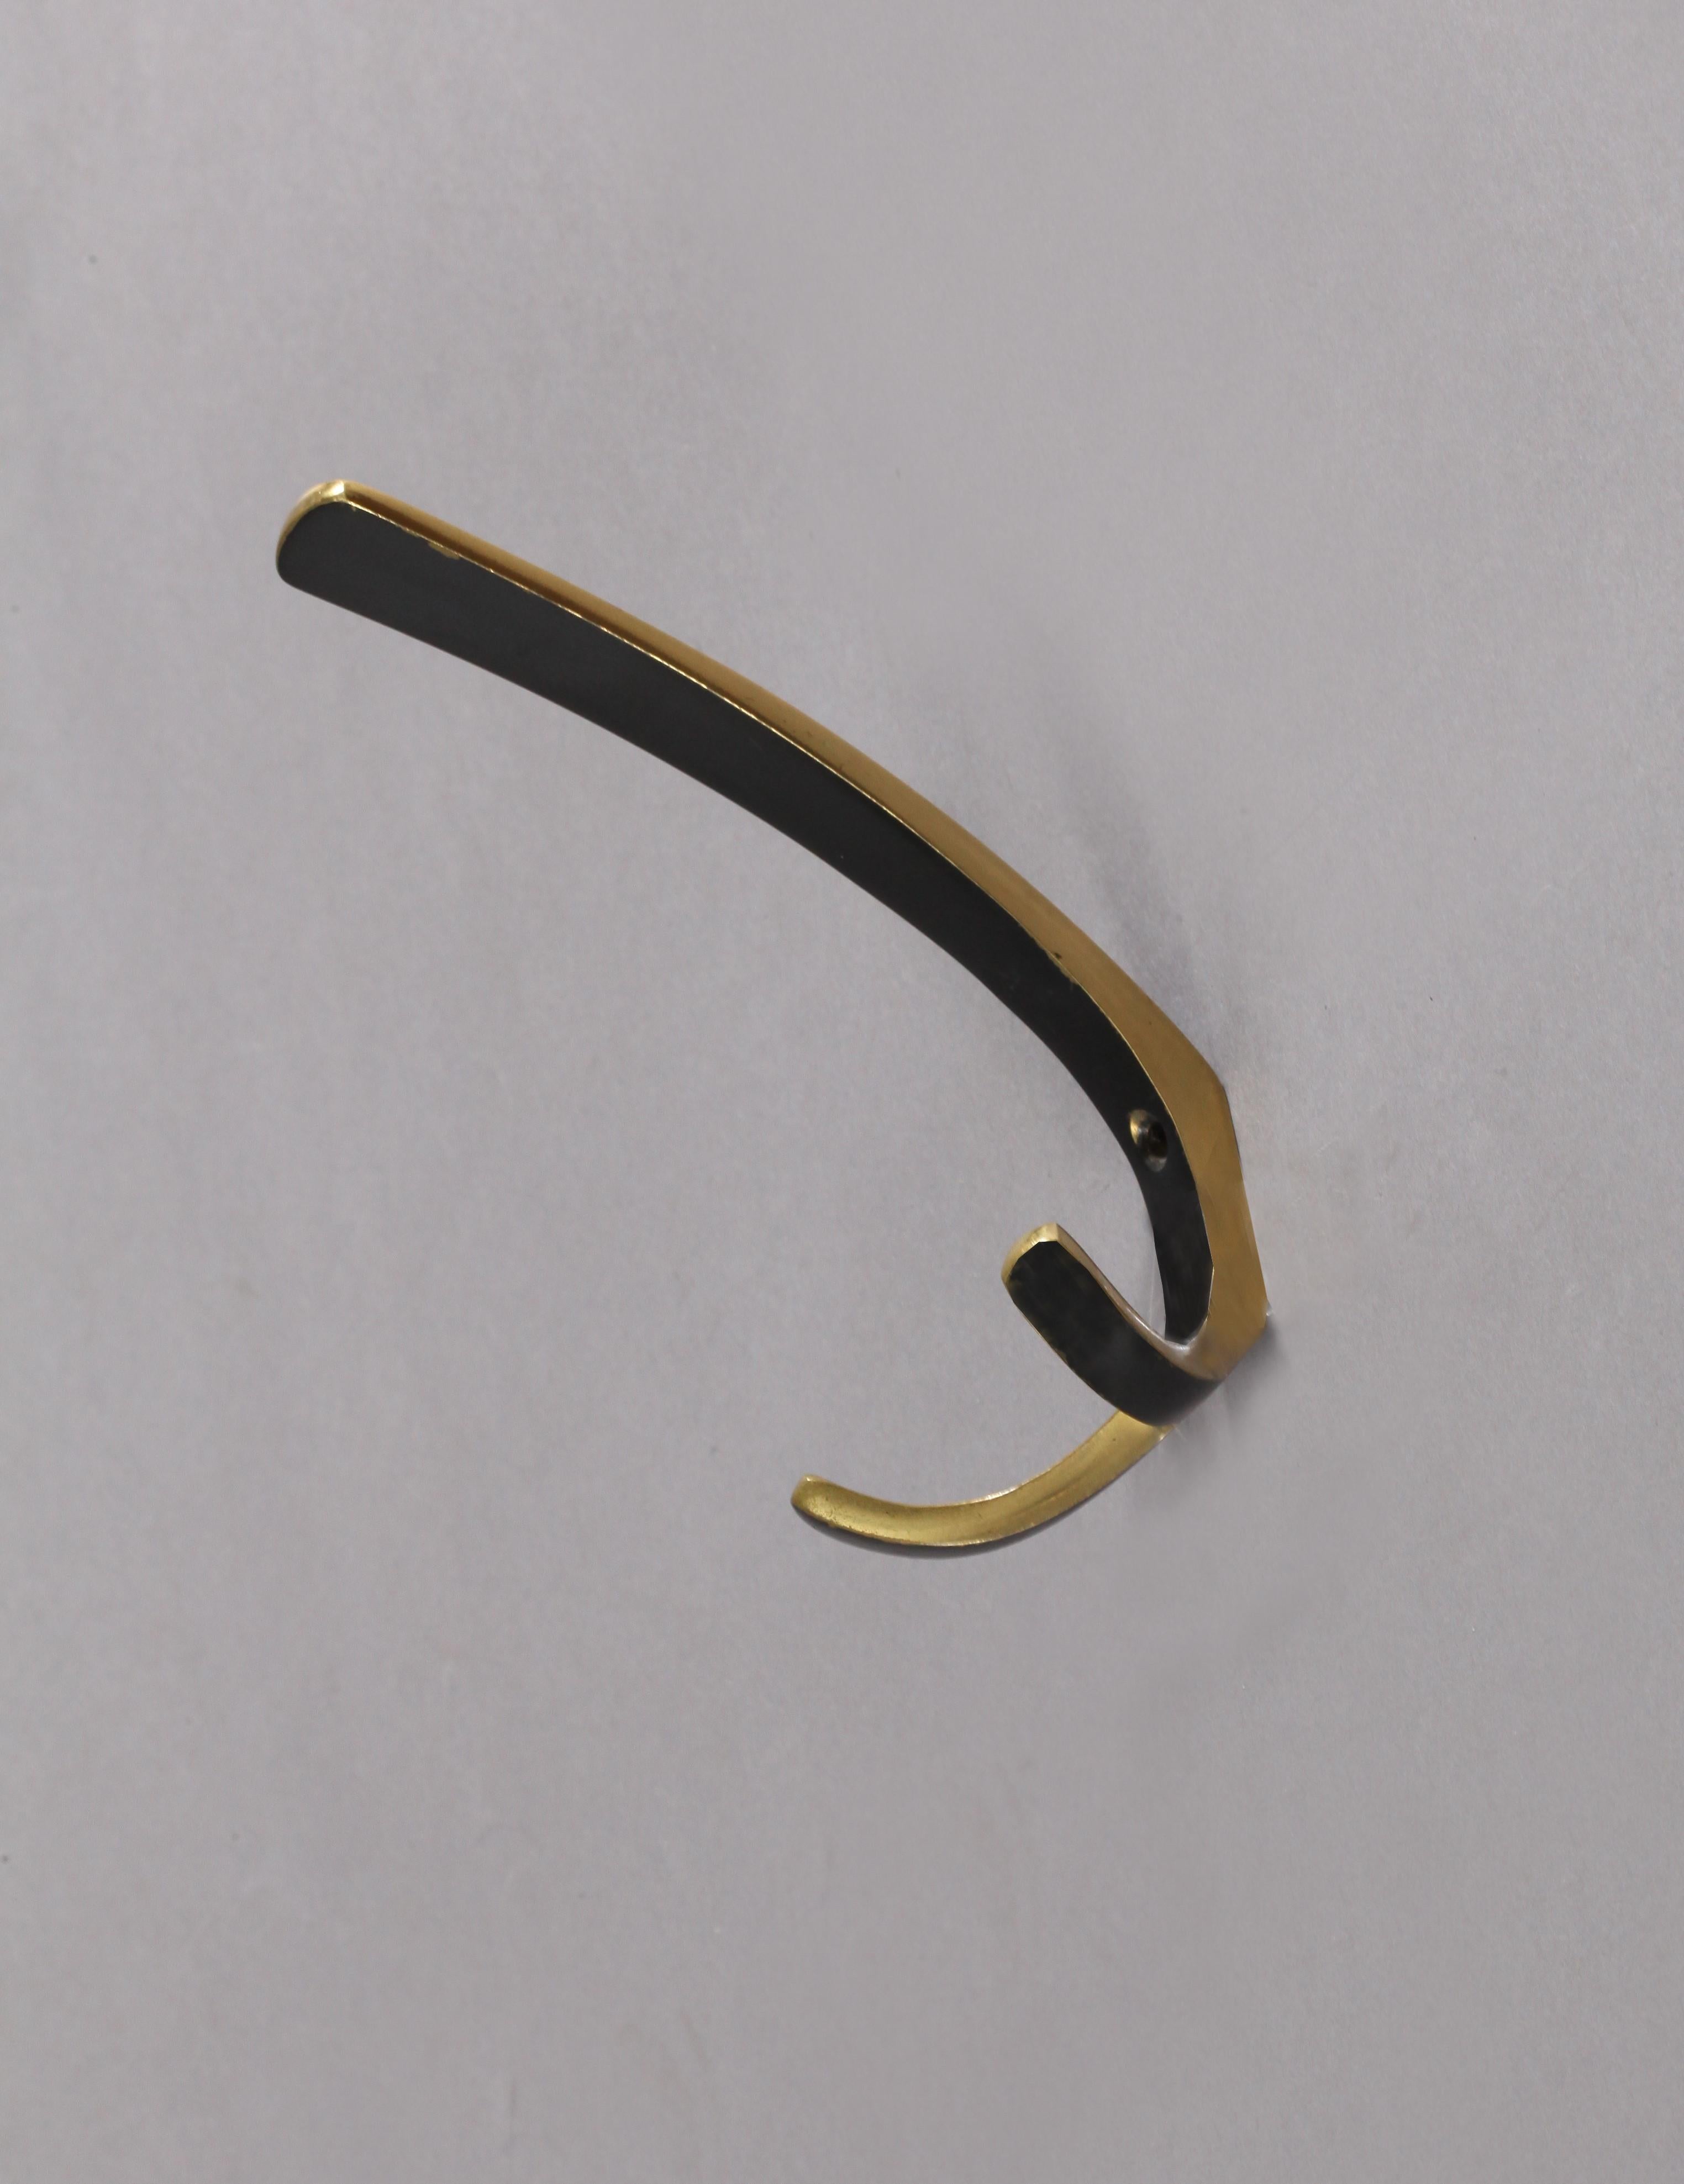 Five simple and elegant wall-mounted brass hooks, with a contrasting faux patina. Having a large upper hook and two small lower hooks.
Vienna, 1950.
Measures: Height 6 inch (16cm) x width 3 inch (7cm) x depth 4 inch (11cm).